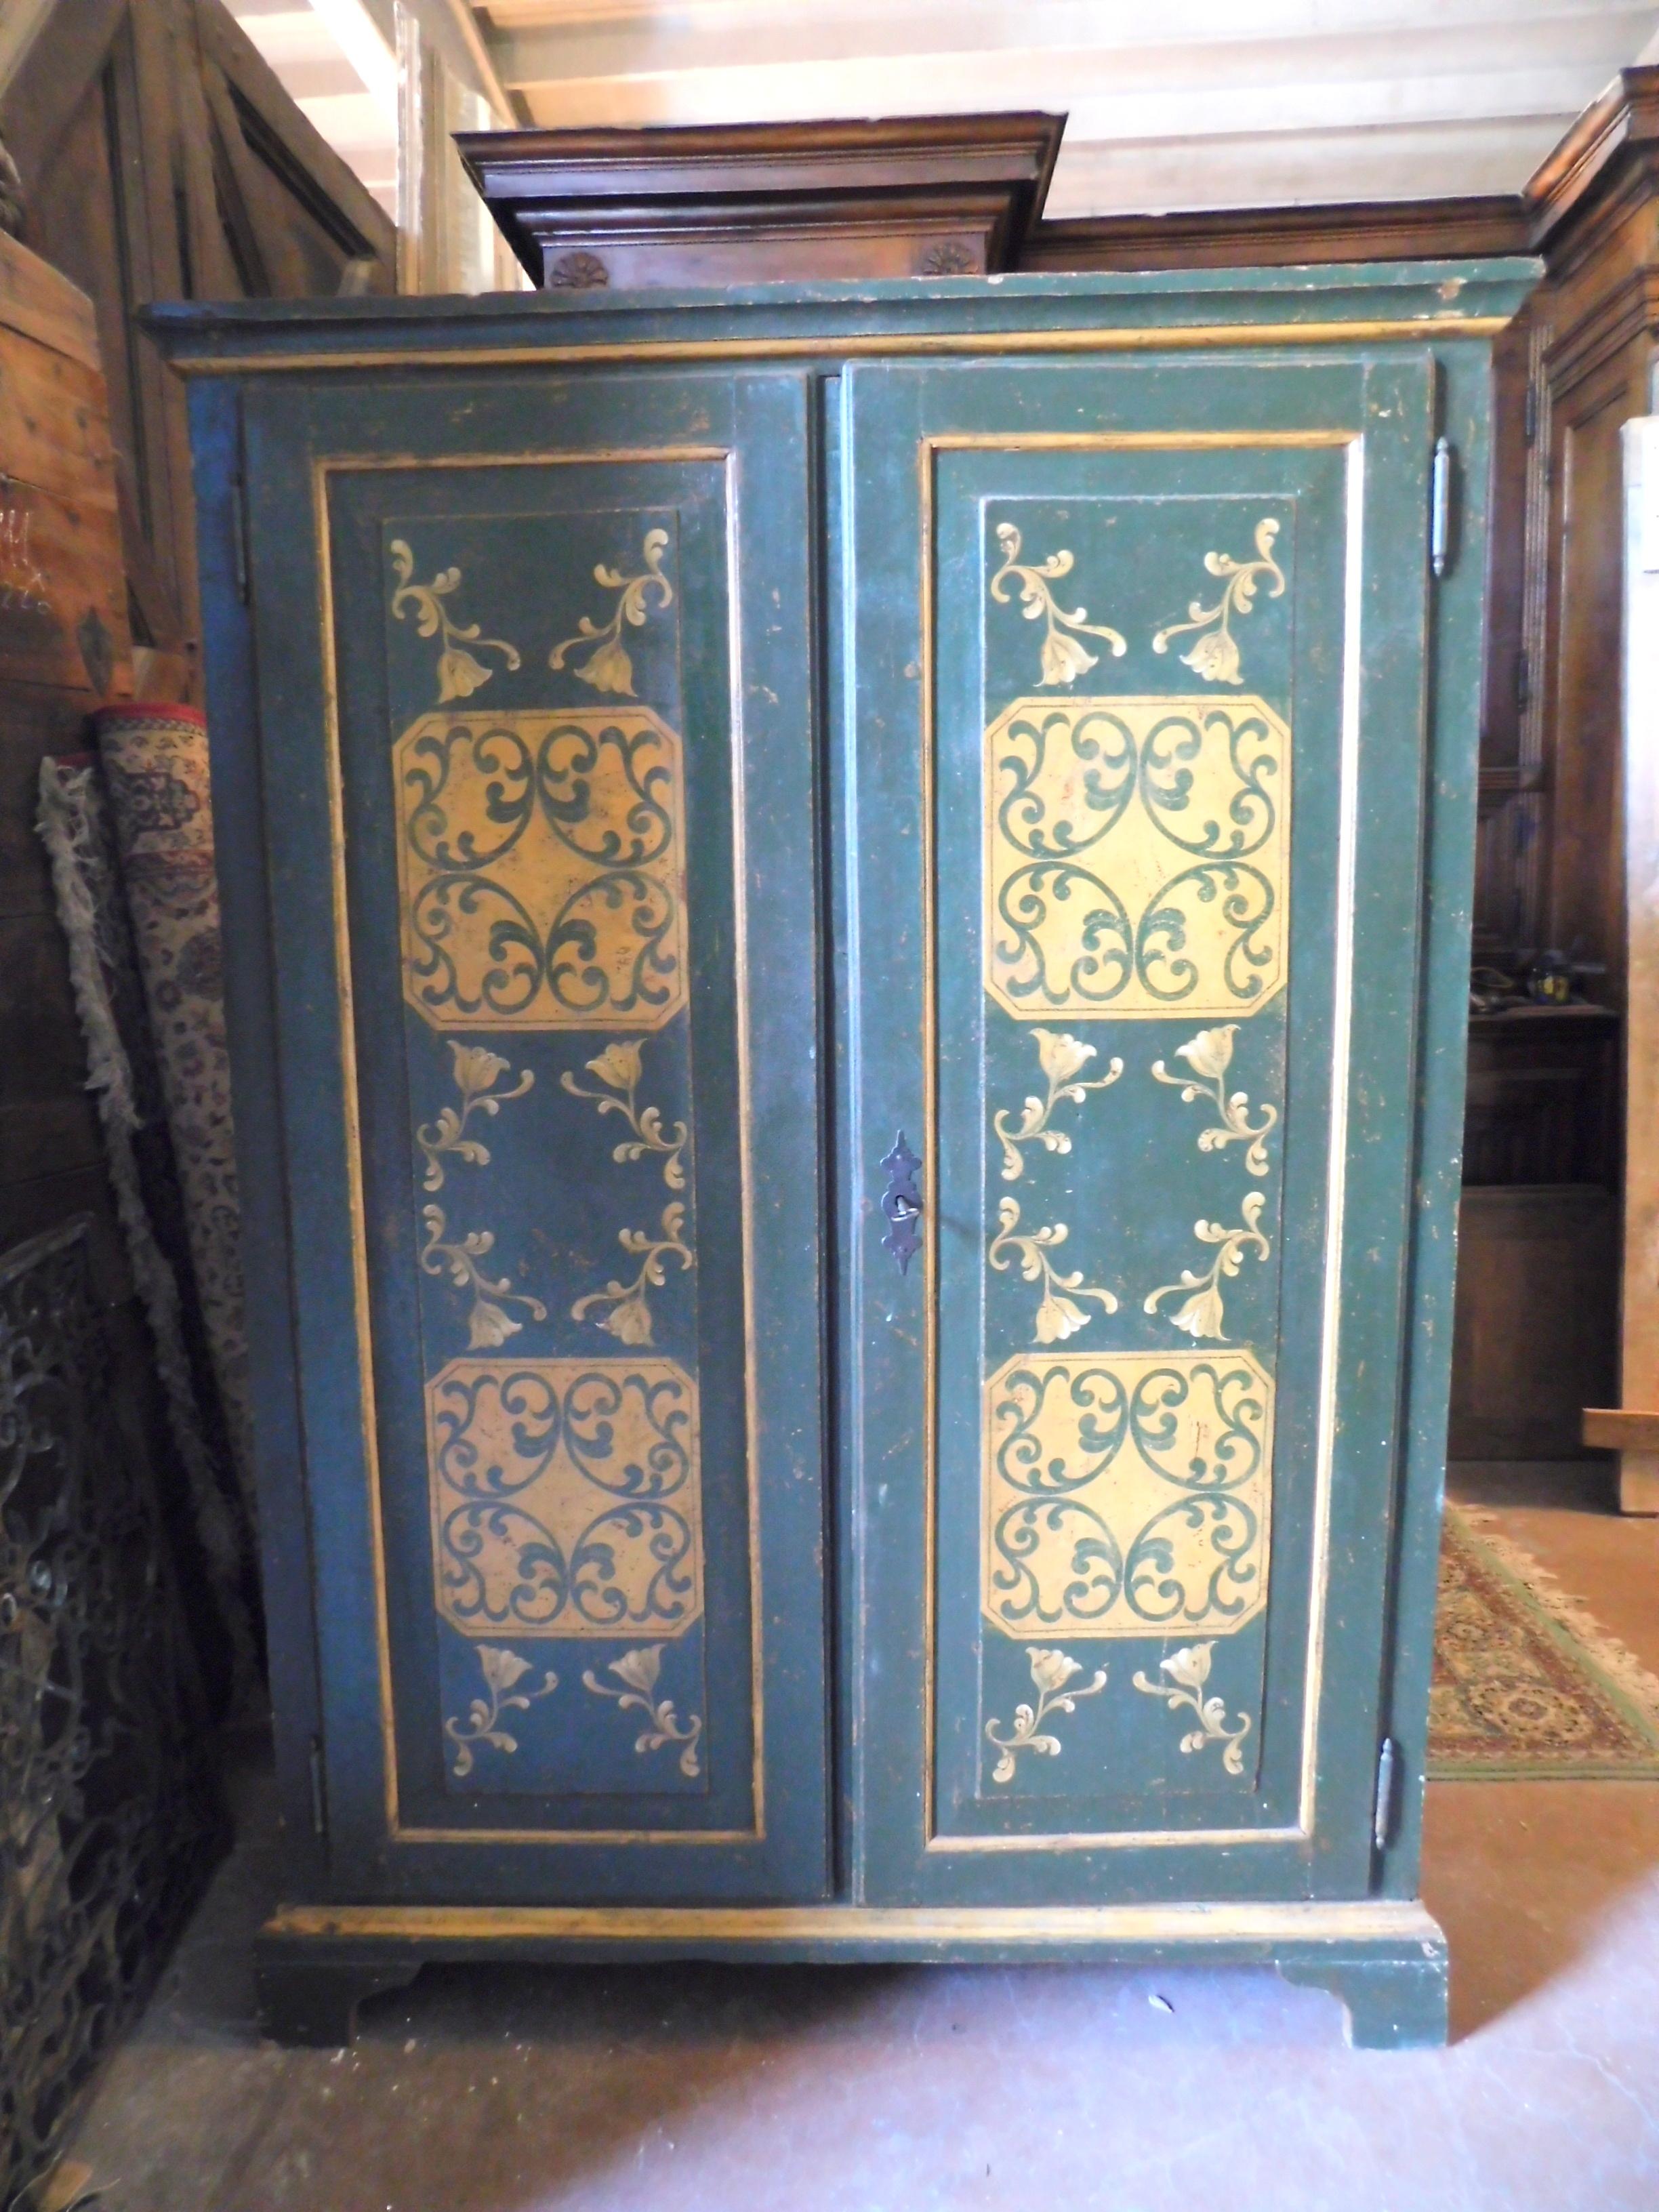 Antique lacquered and painted wardrobe with green background and typical yellow decorations, hand-built in the 19th century, from Piedmont (Italy), has double door with original lock, also painted on the side, solid wood, very well finished and